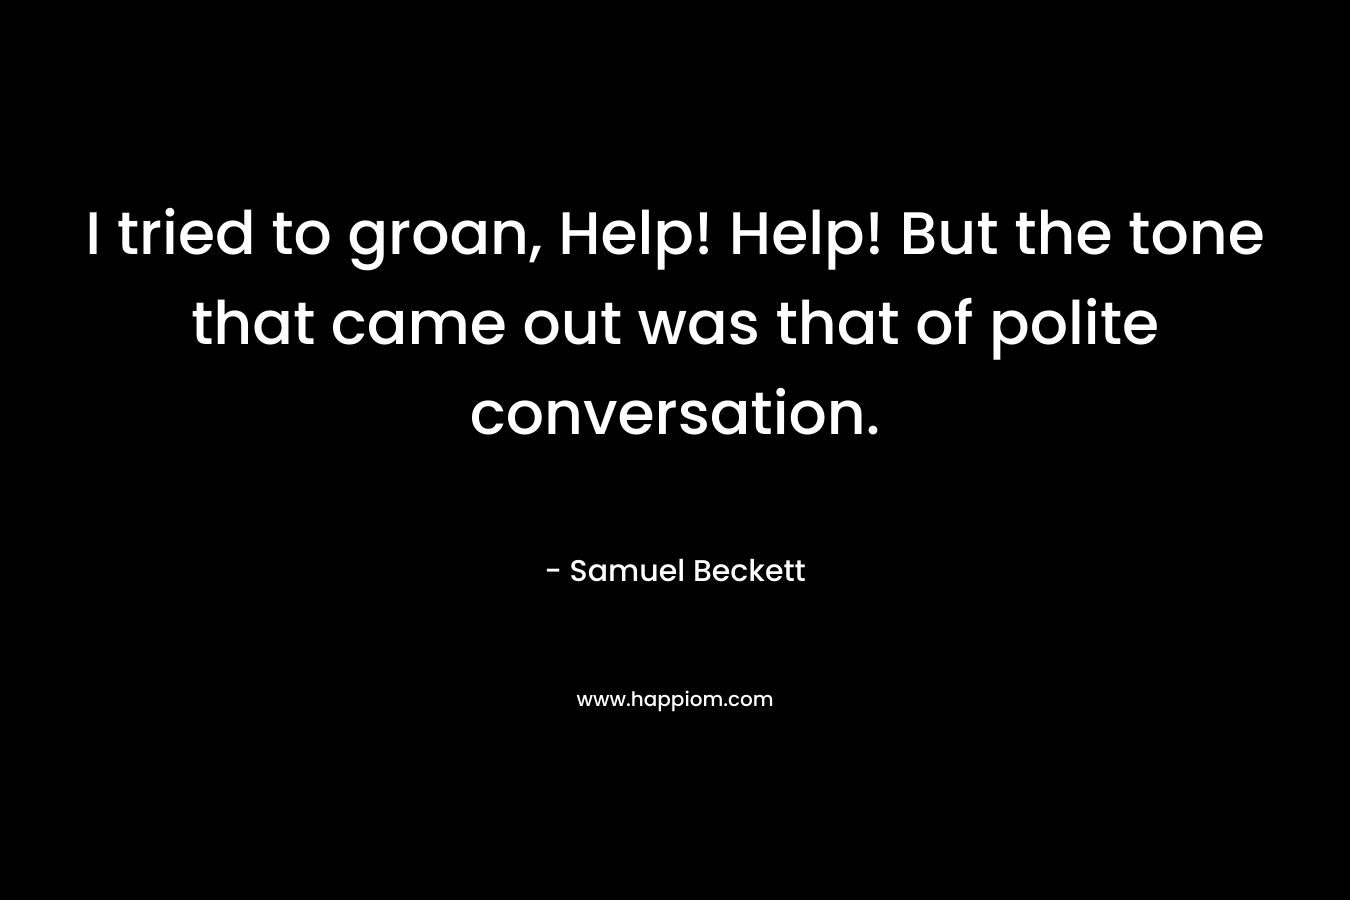 I tried to groan, Help! Help! But the tone that came out was that of polite conversation. – Samuel Beckett